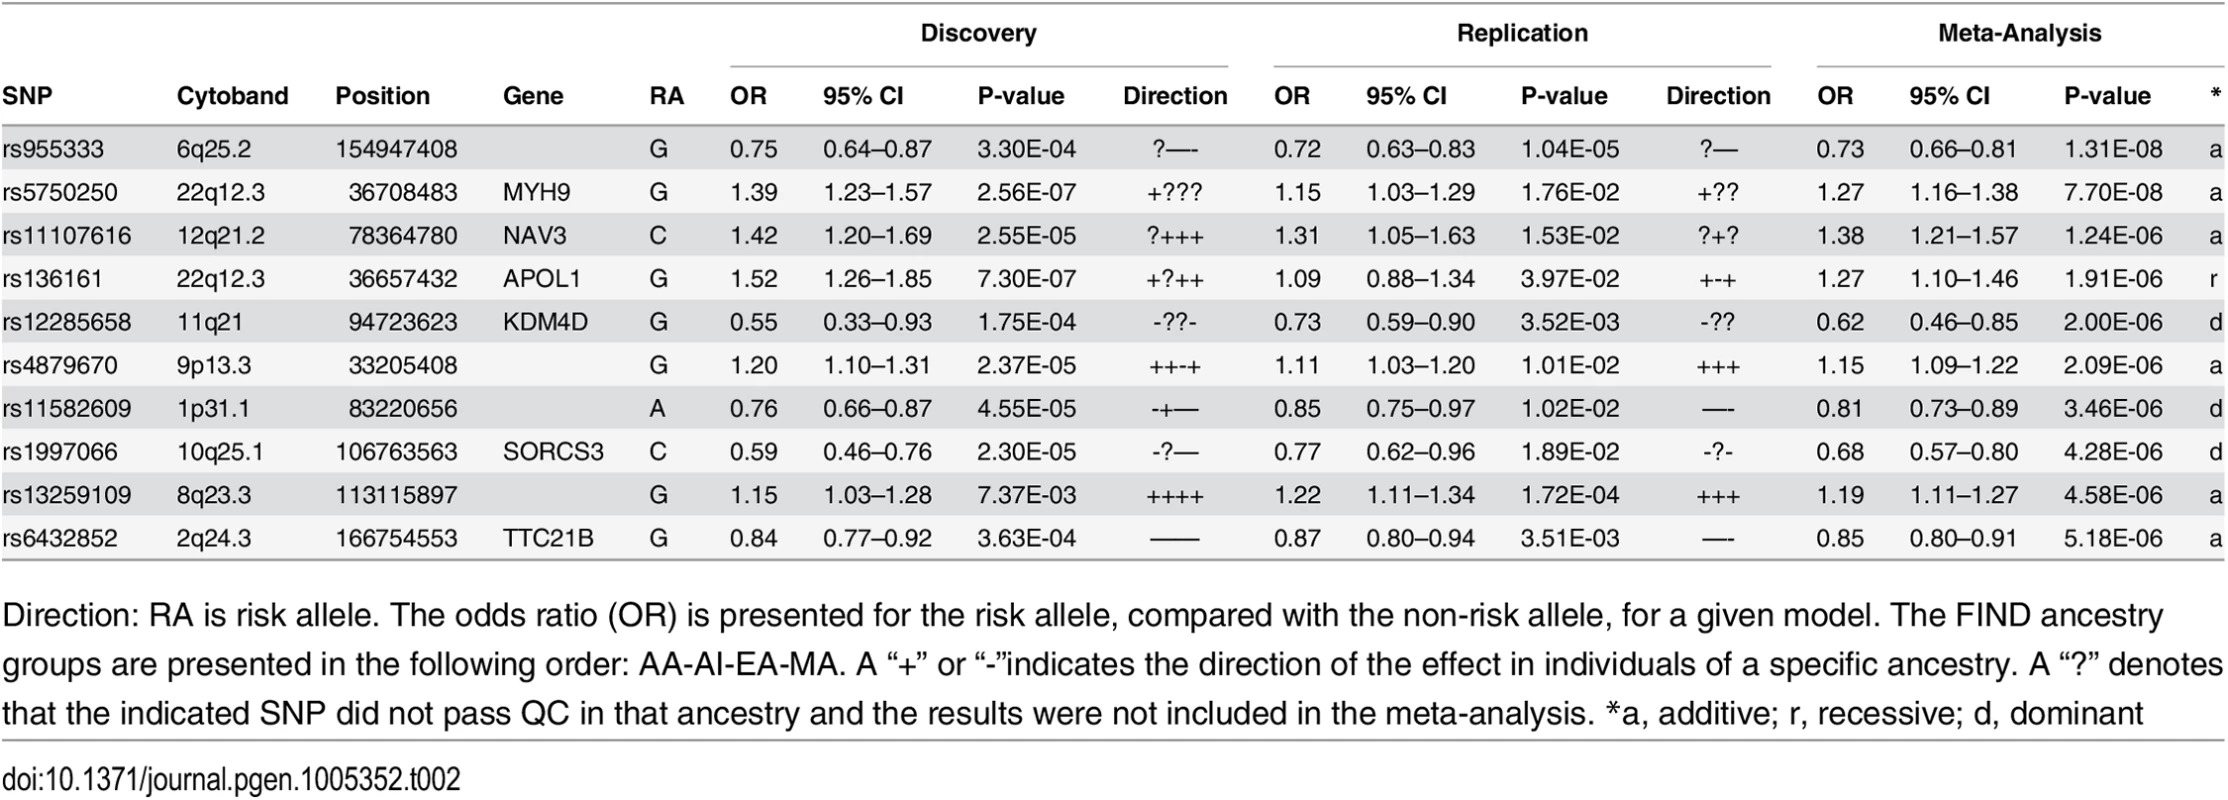 Trans-ethnic meta-analysis GWAS results, across Discovery and Replication samples.